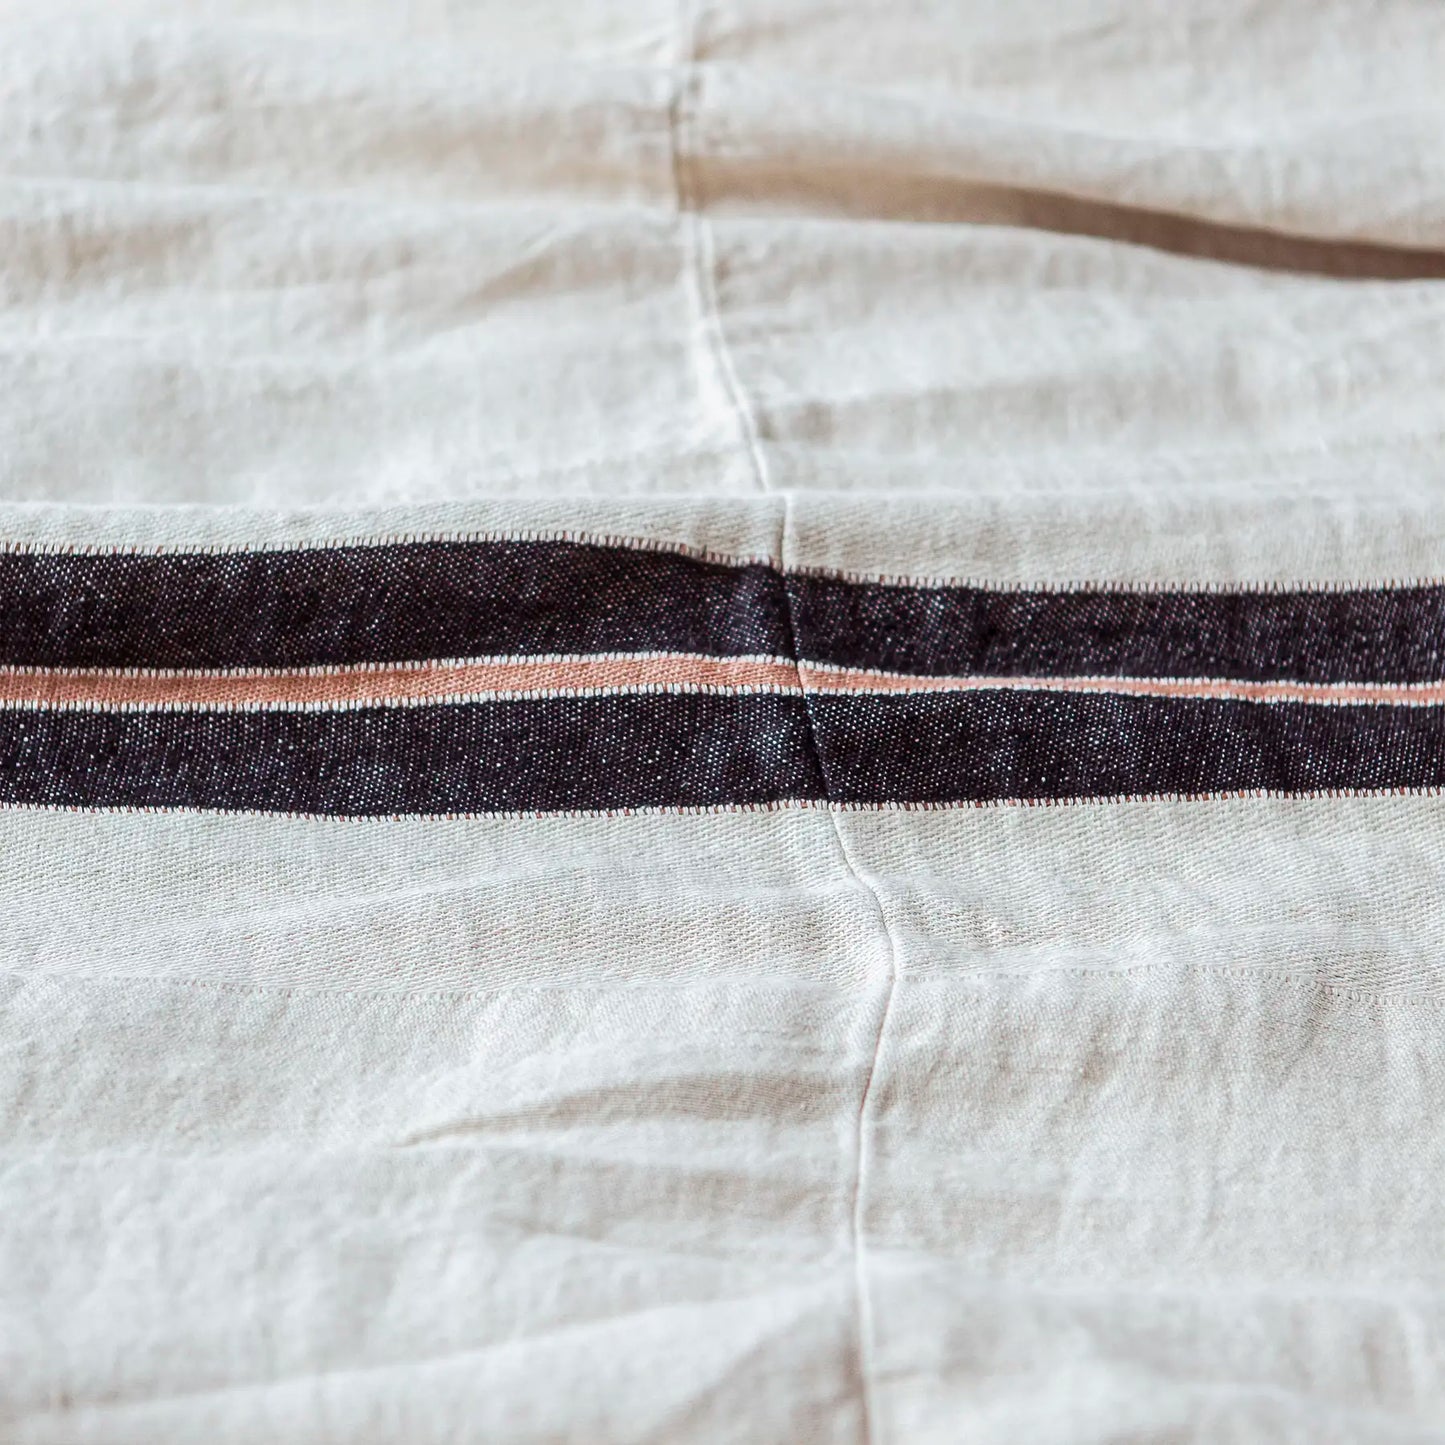 The Patagonia Stripe Coverlet